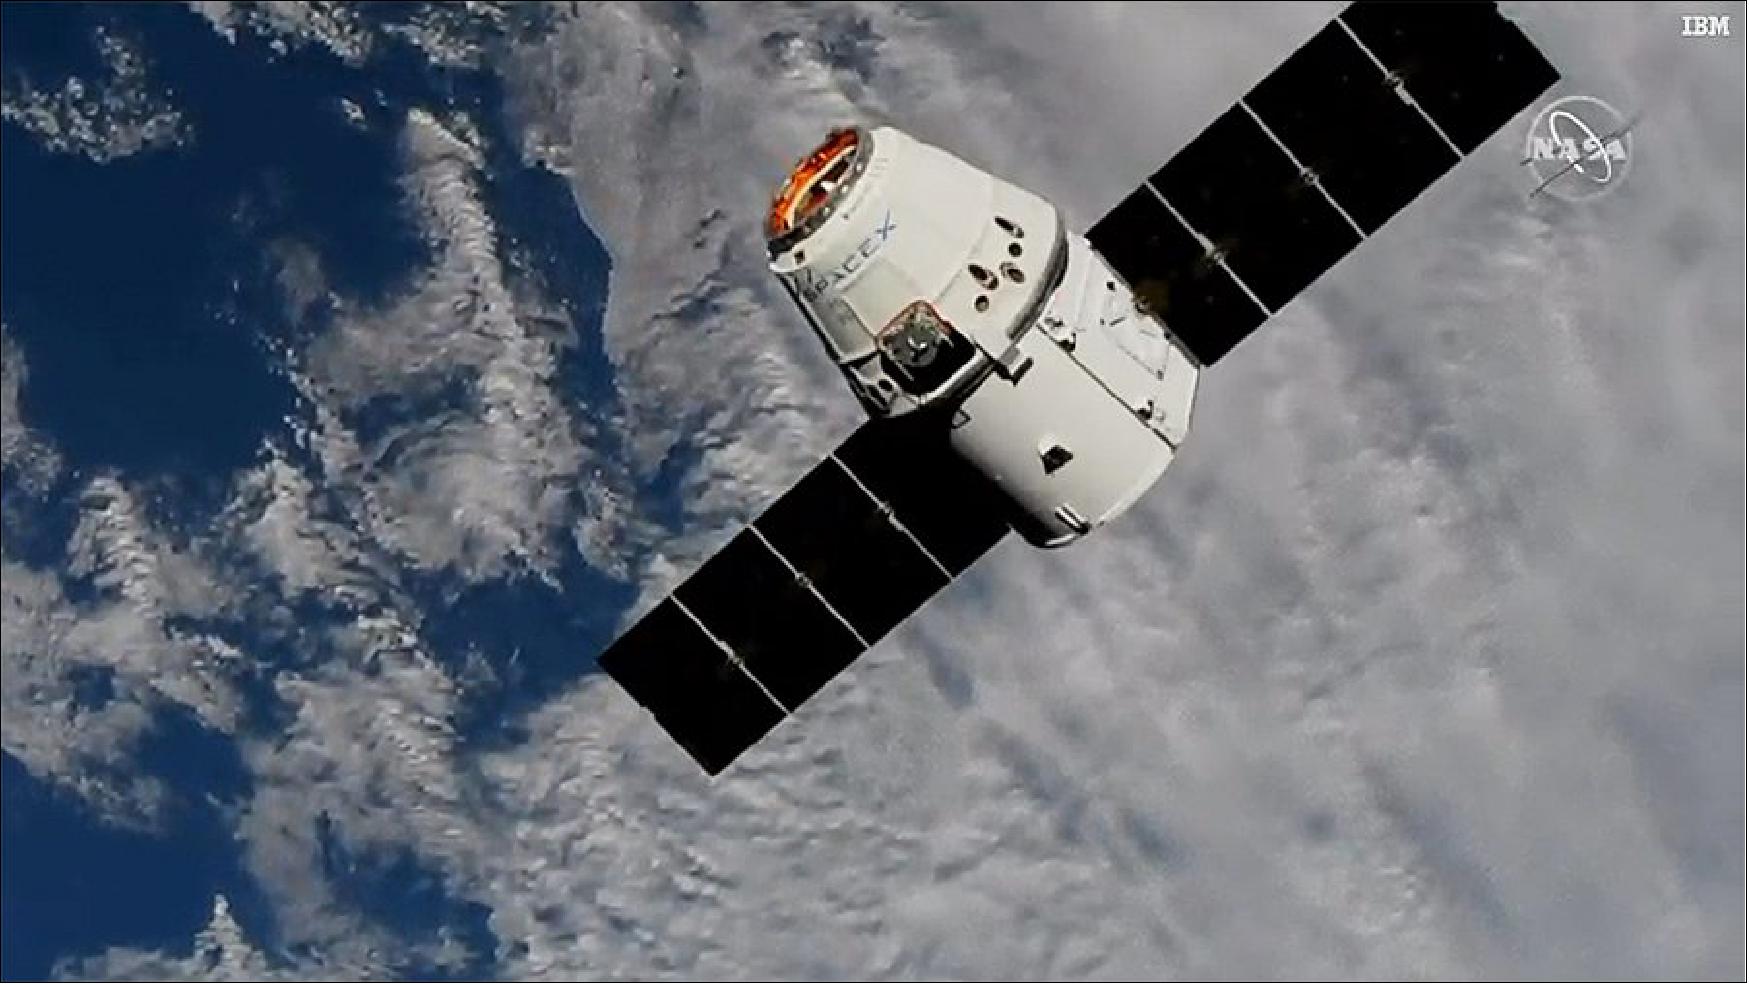 Figure 6: The 20th SpaceX Dragon resupply mission approaches the space station (image credit: NASA TV)